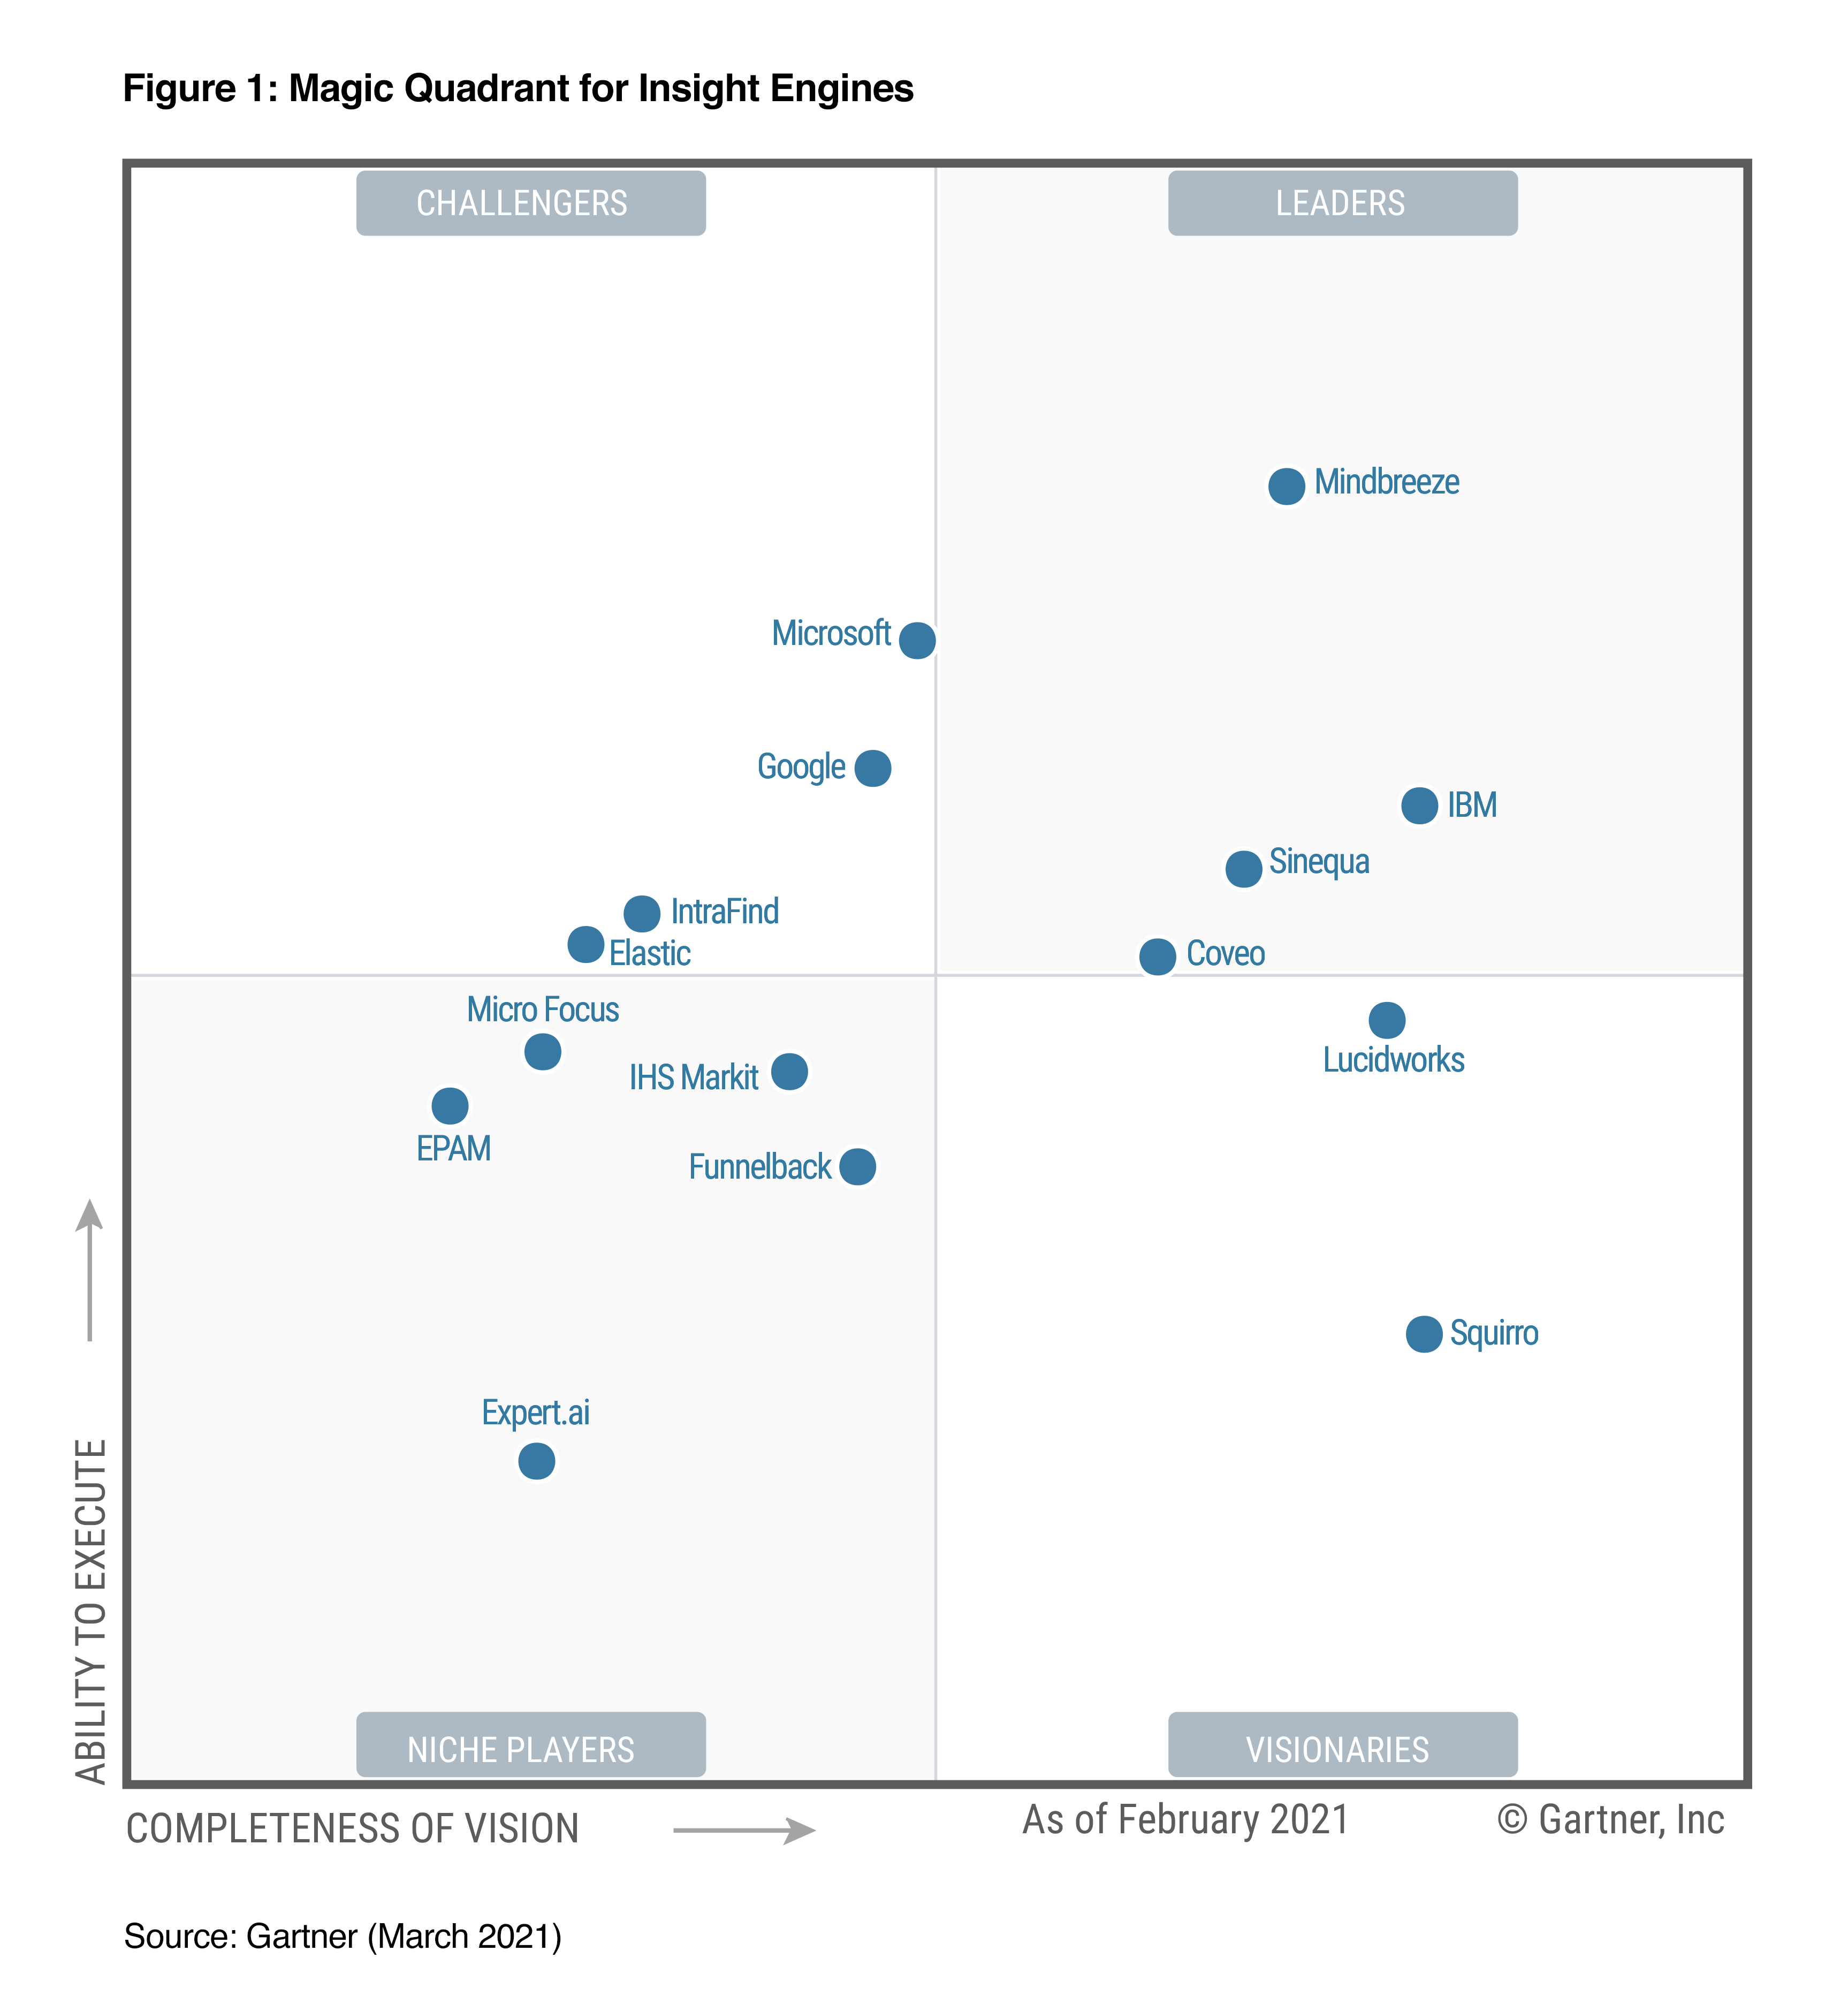 Elastic has been recognized as a Challenger in the 2021 Gartner Magic Quadrant for Insight Engines